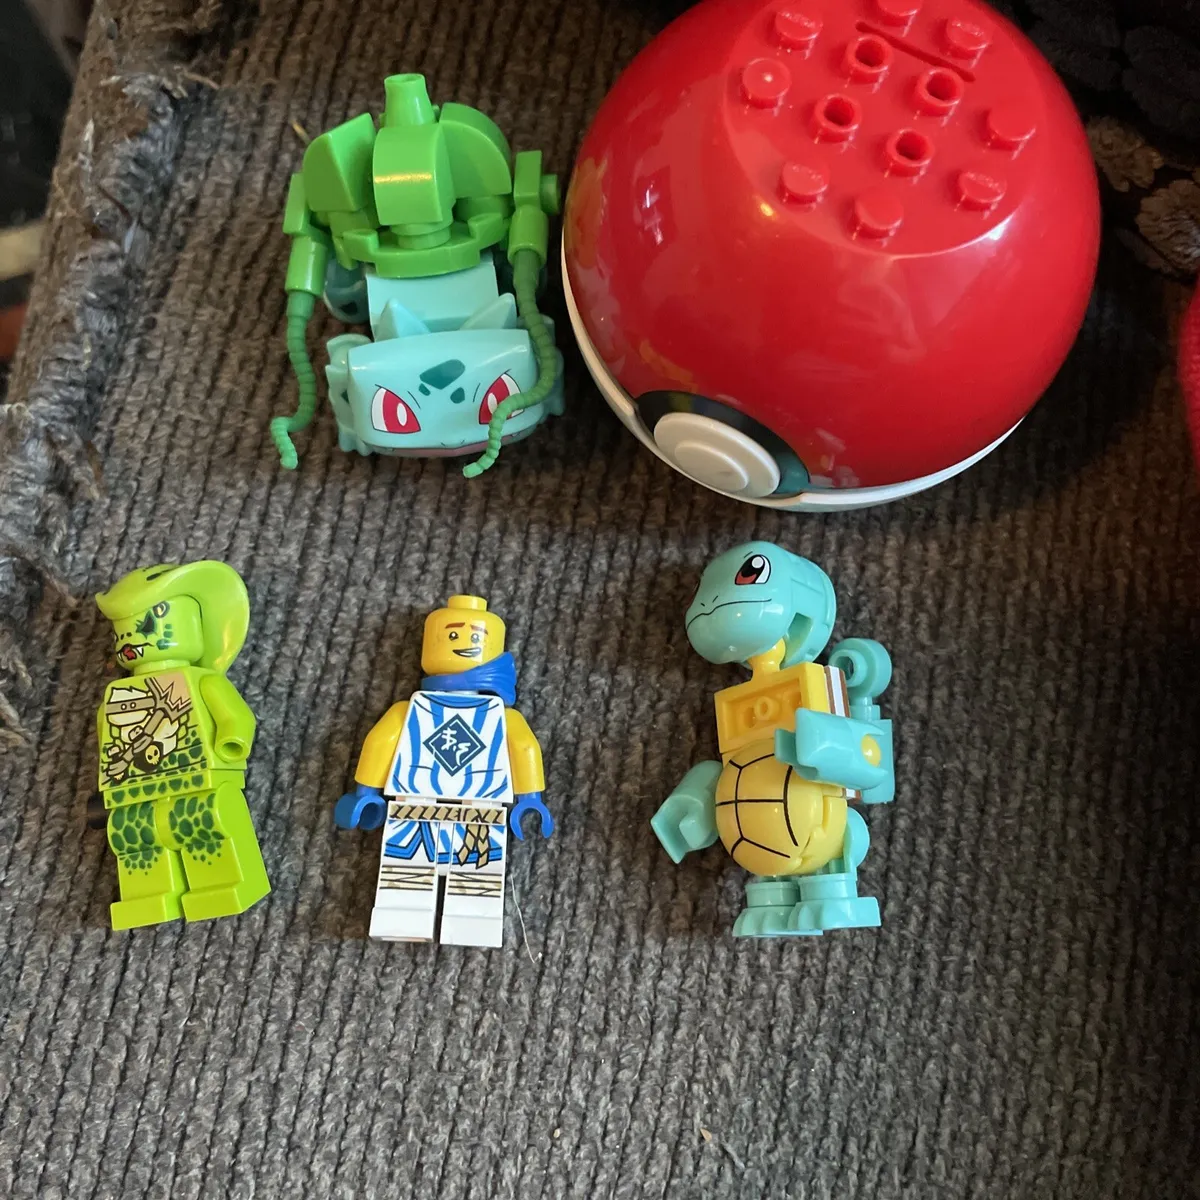 Pokémon Lego Figures and more items missing parts